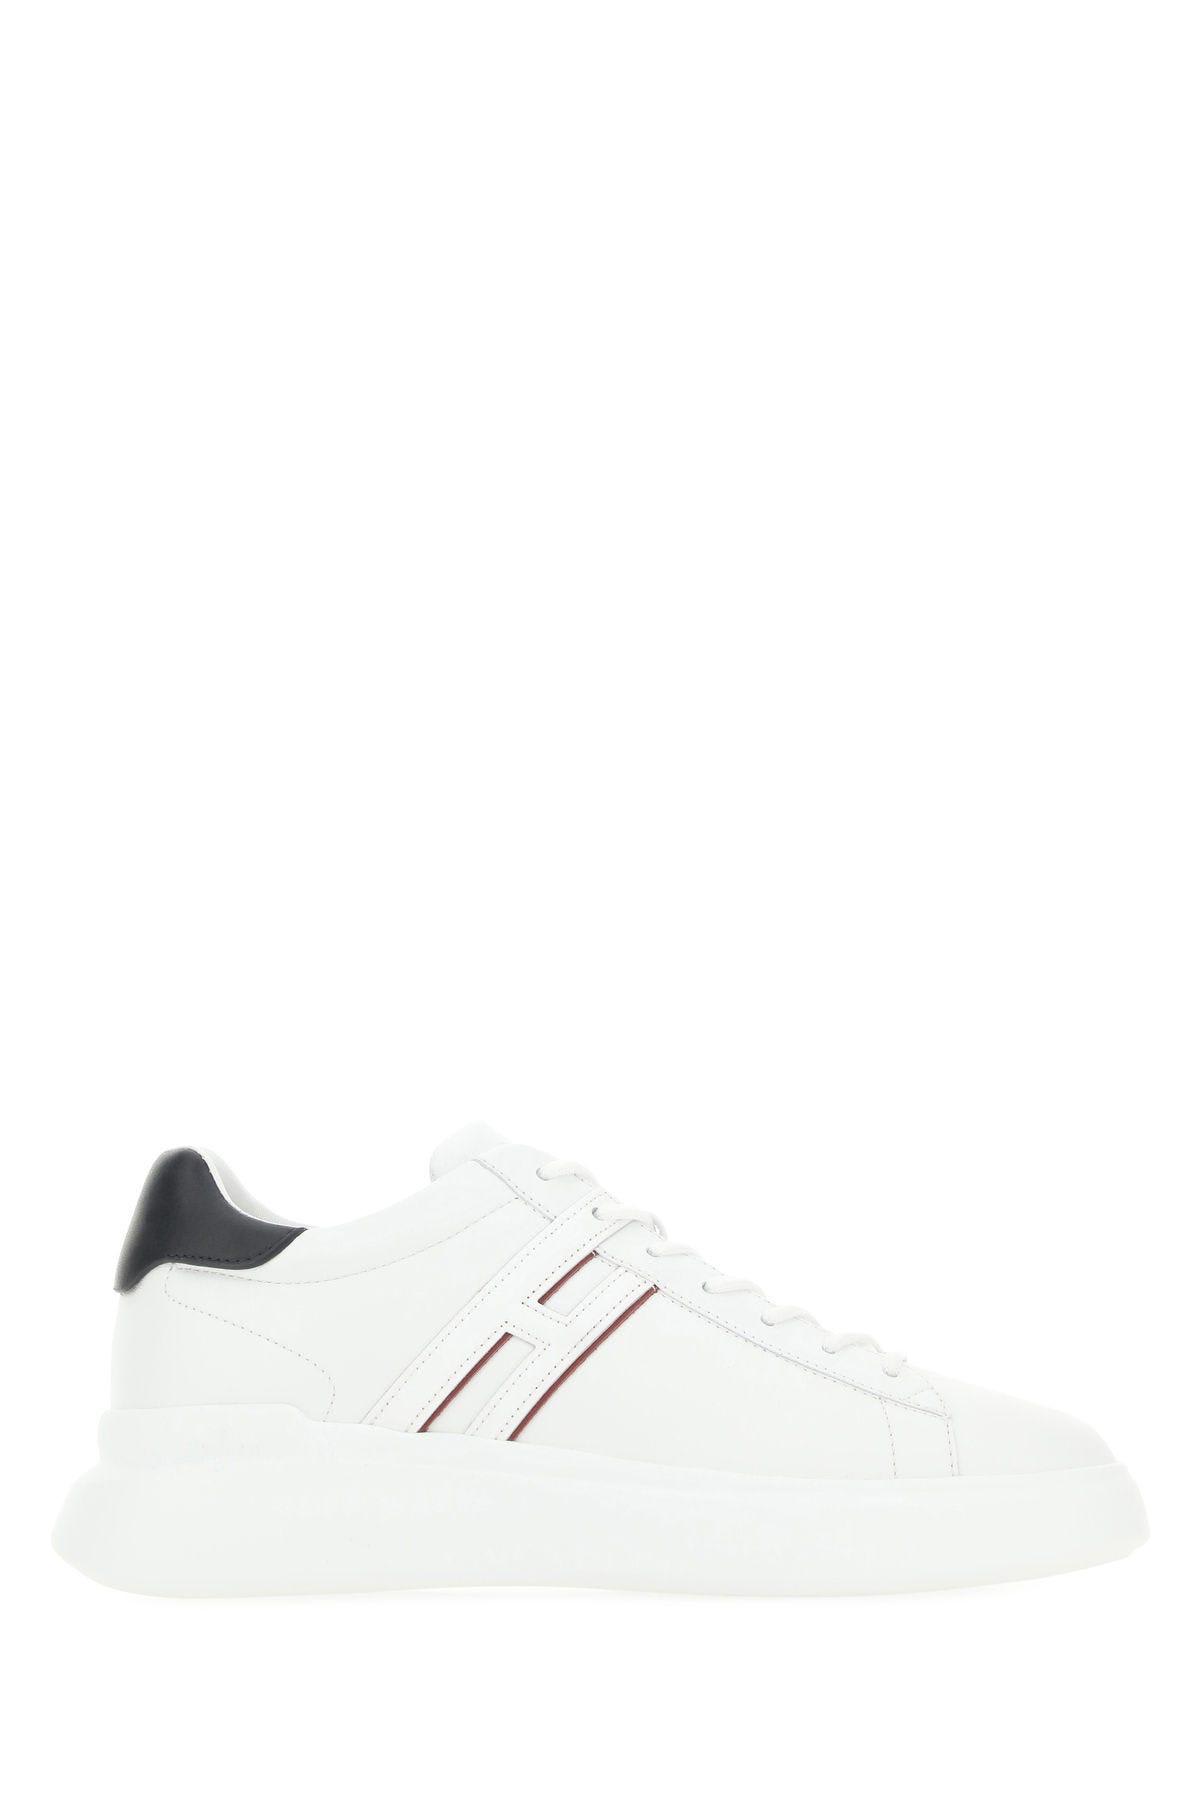 Shop Hogan White Leather H580 Sneakers